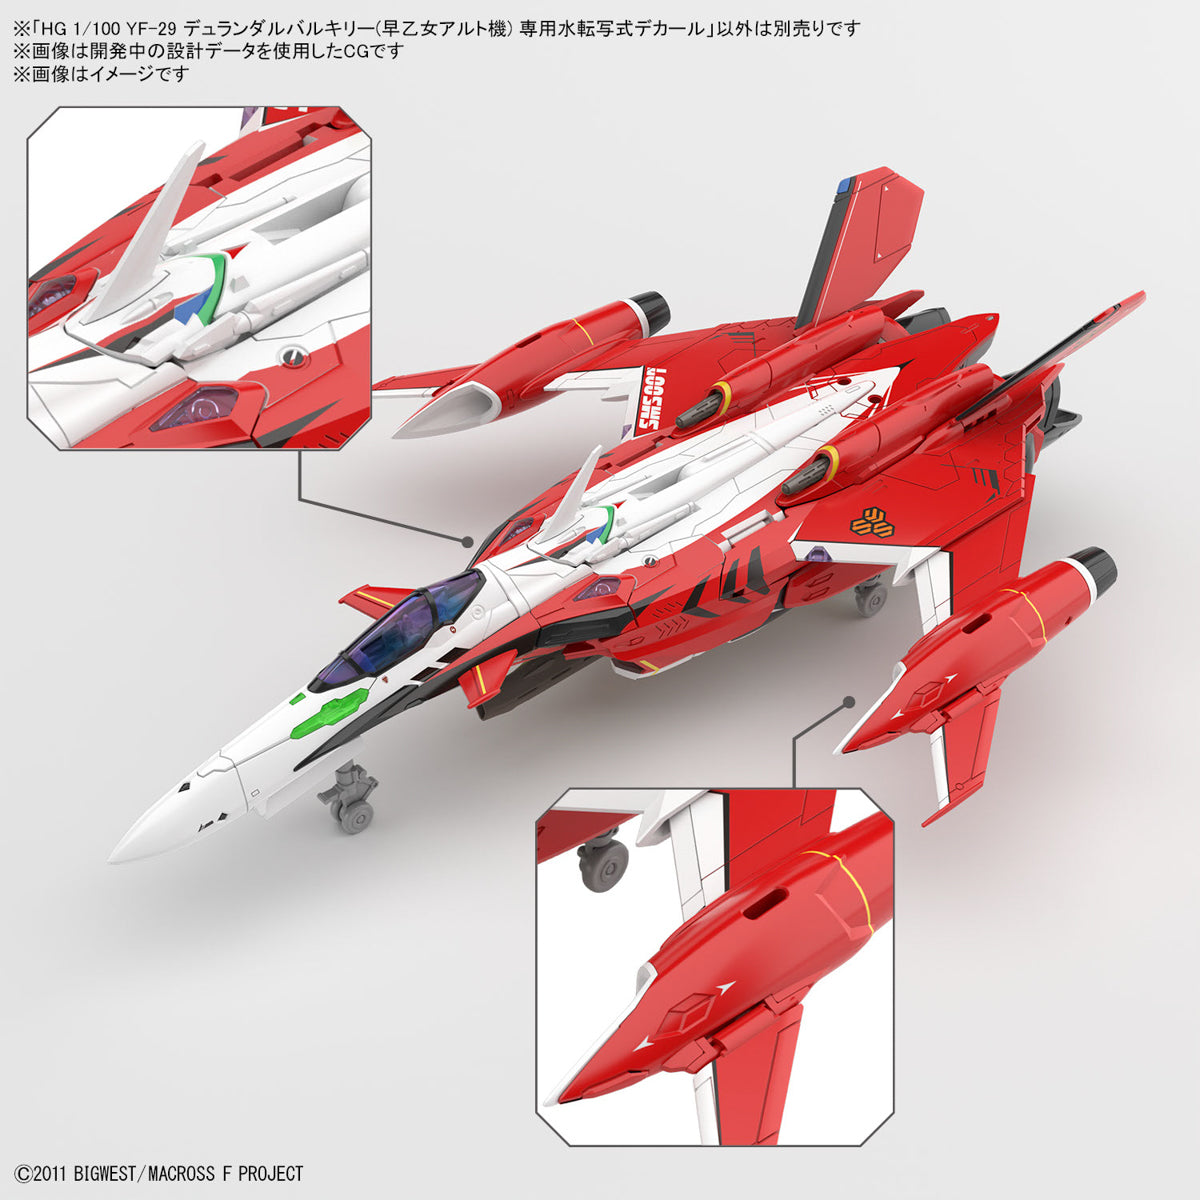 HG 1/100 YF-29 Durandal Valkyrie (Alto Saotome Machine) Exclusive water slide decal